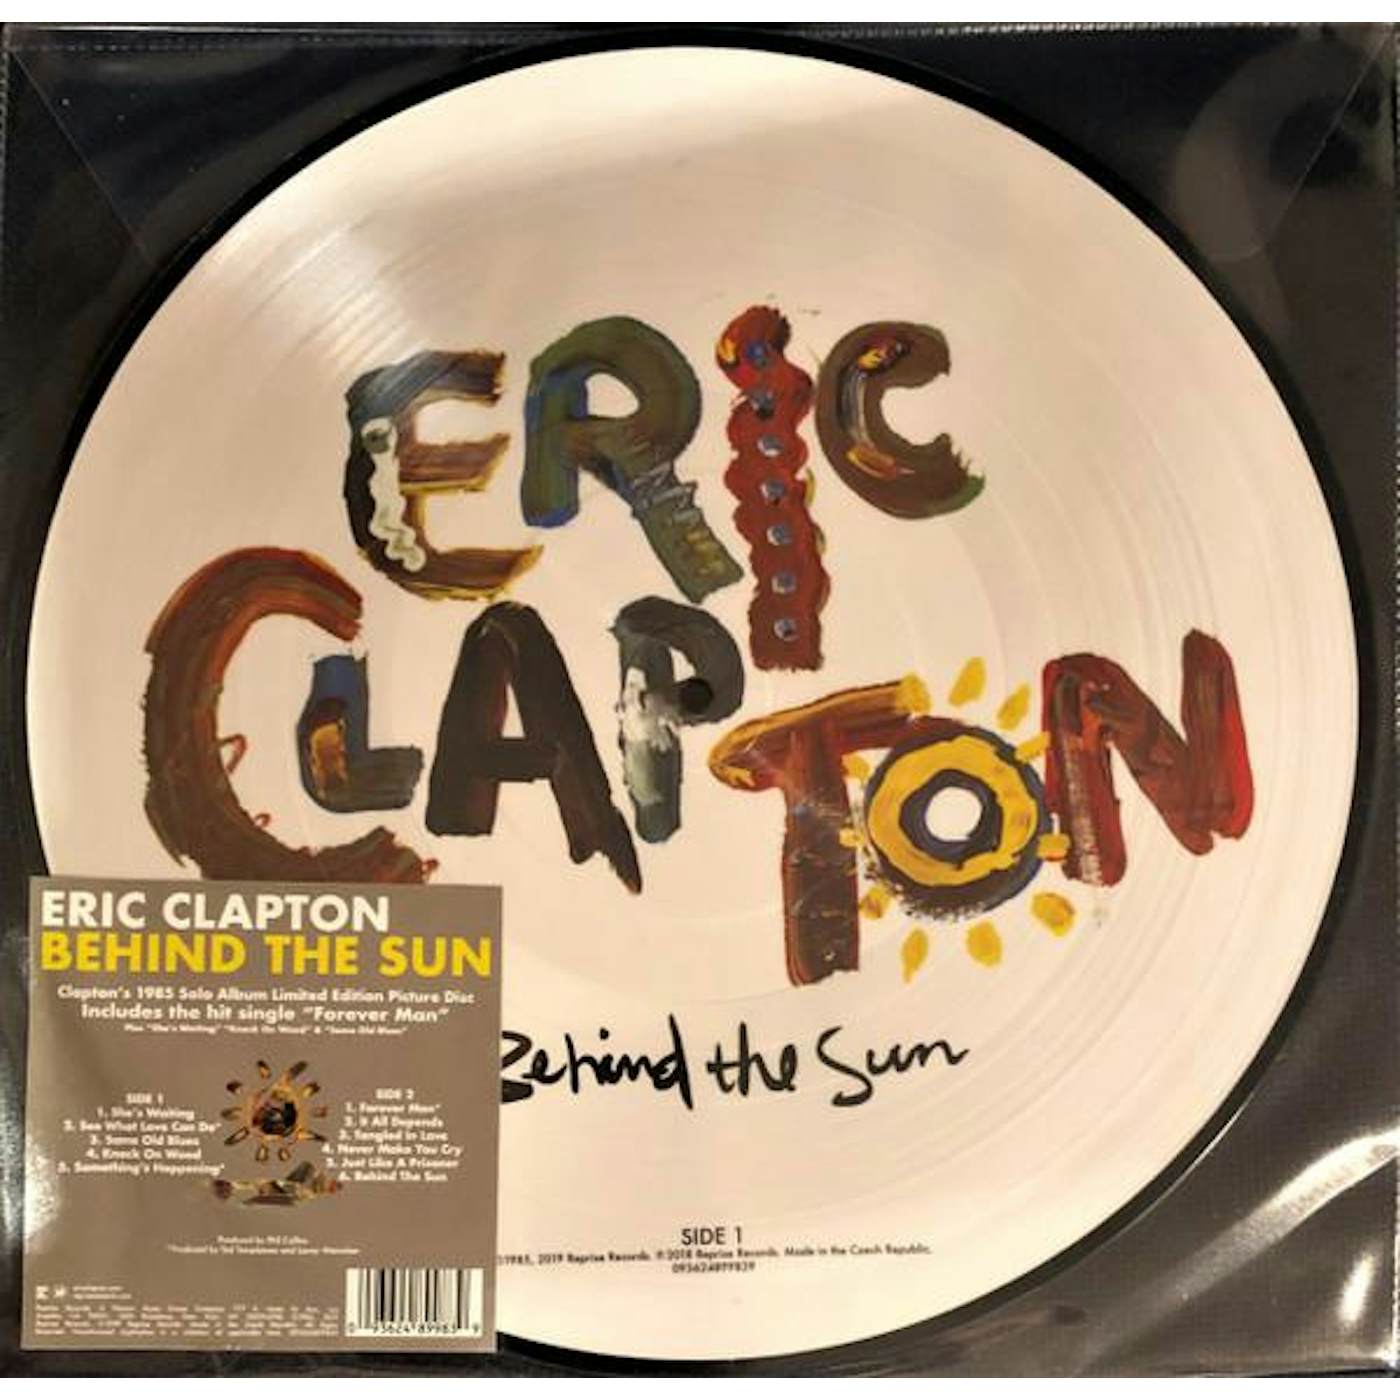 Eric Clapton BEHIND THE SUN (PICTURE DISC) Vinyl Record